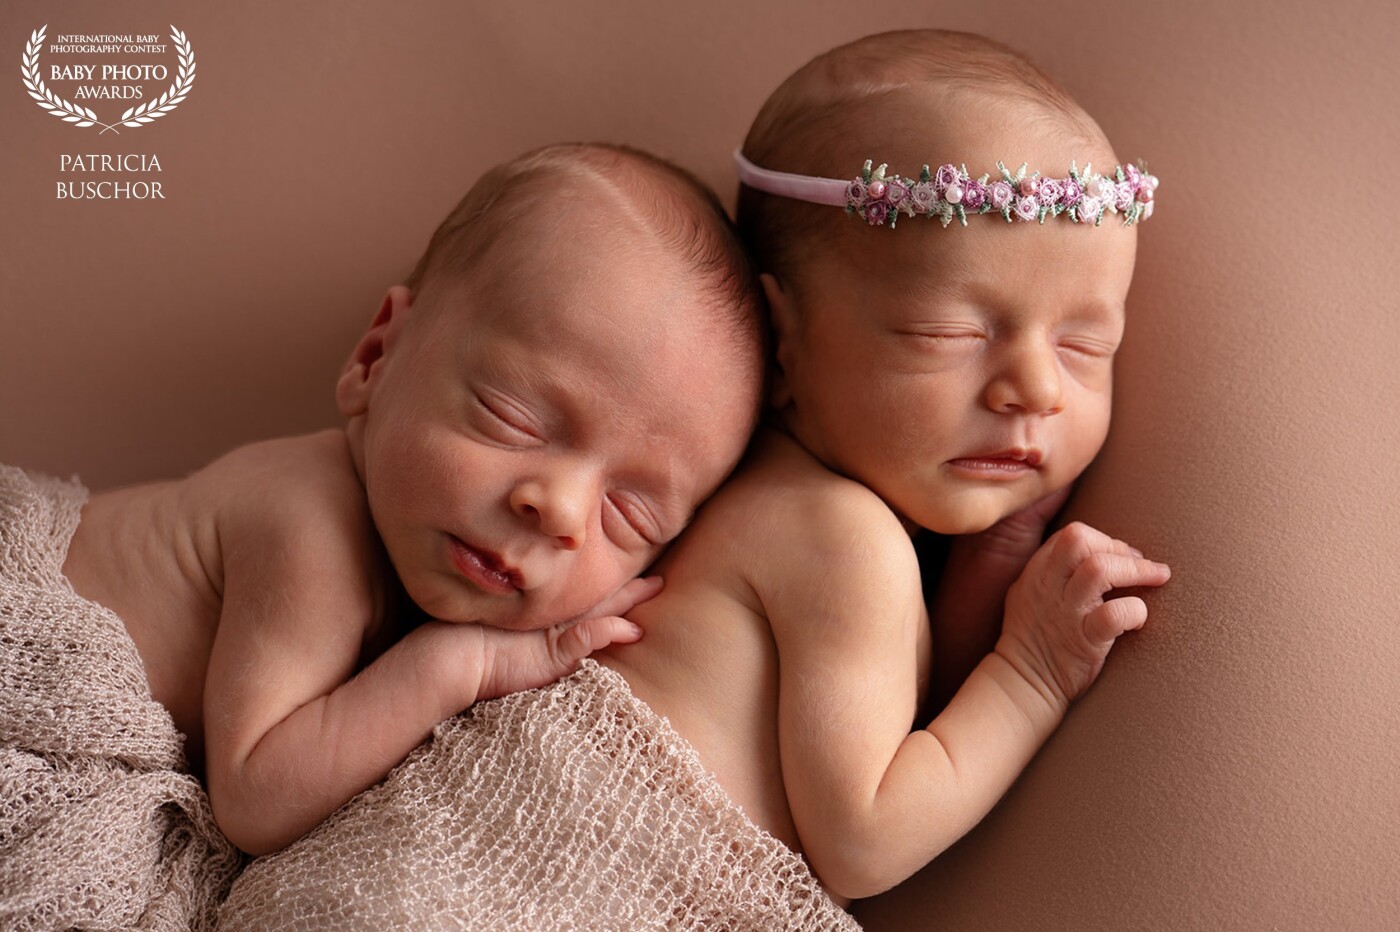 The photo shoot with the twins was just magical. They have participated super well and slept quite a lot. It was a huge honor to photograph these two wonders of very close friends of mine